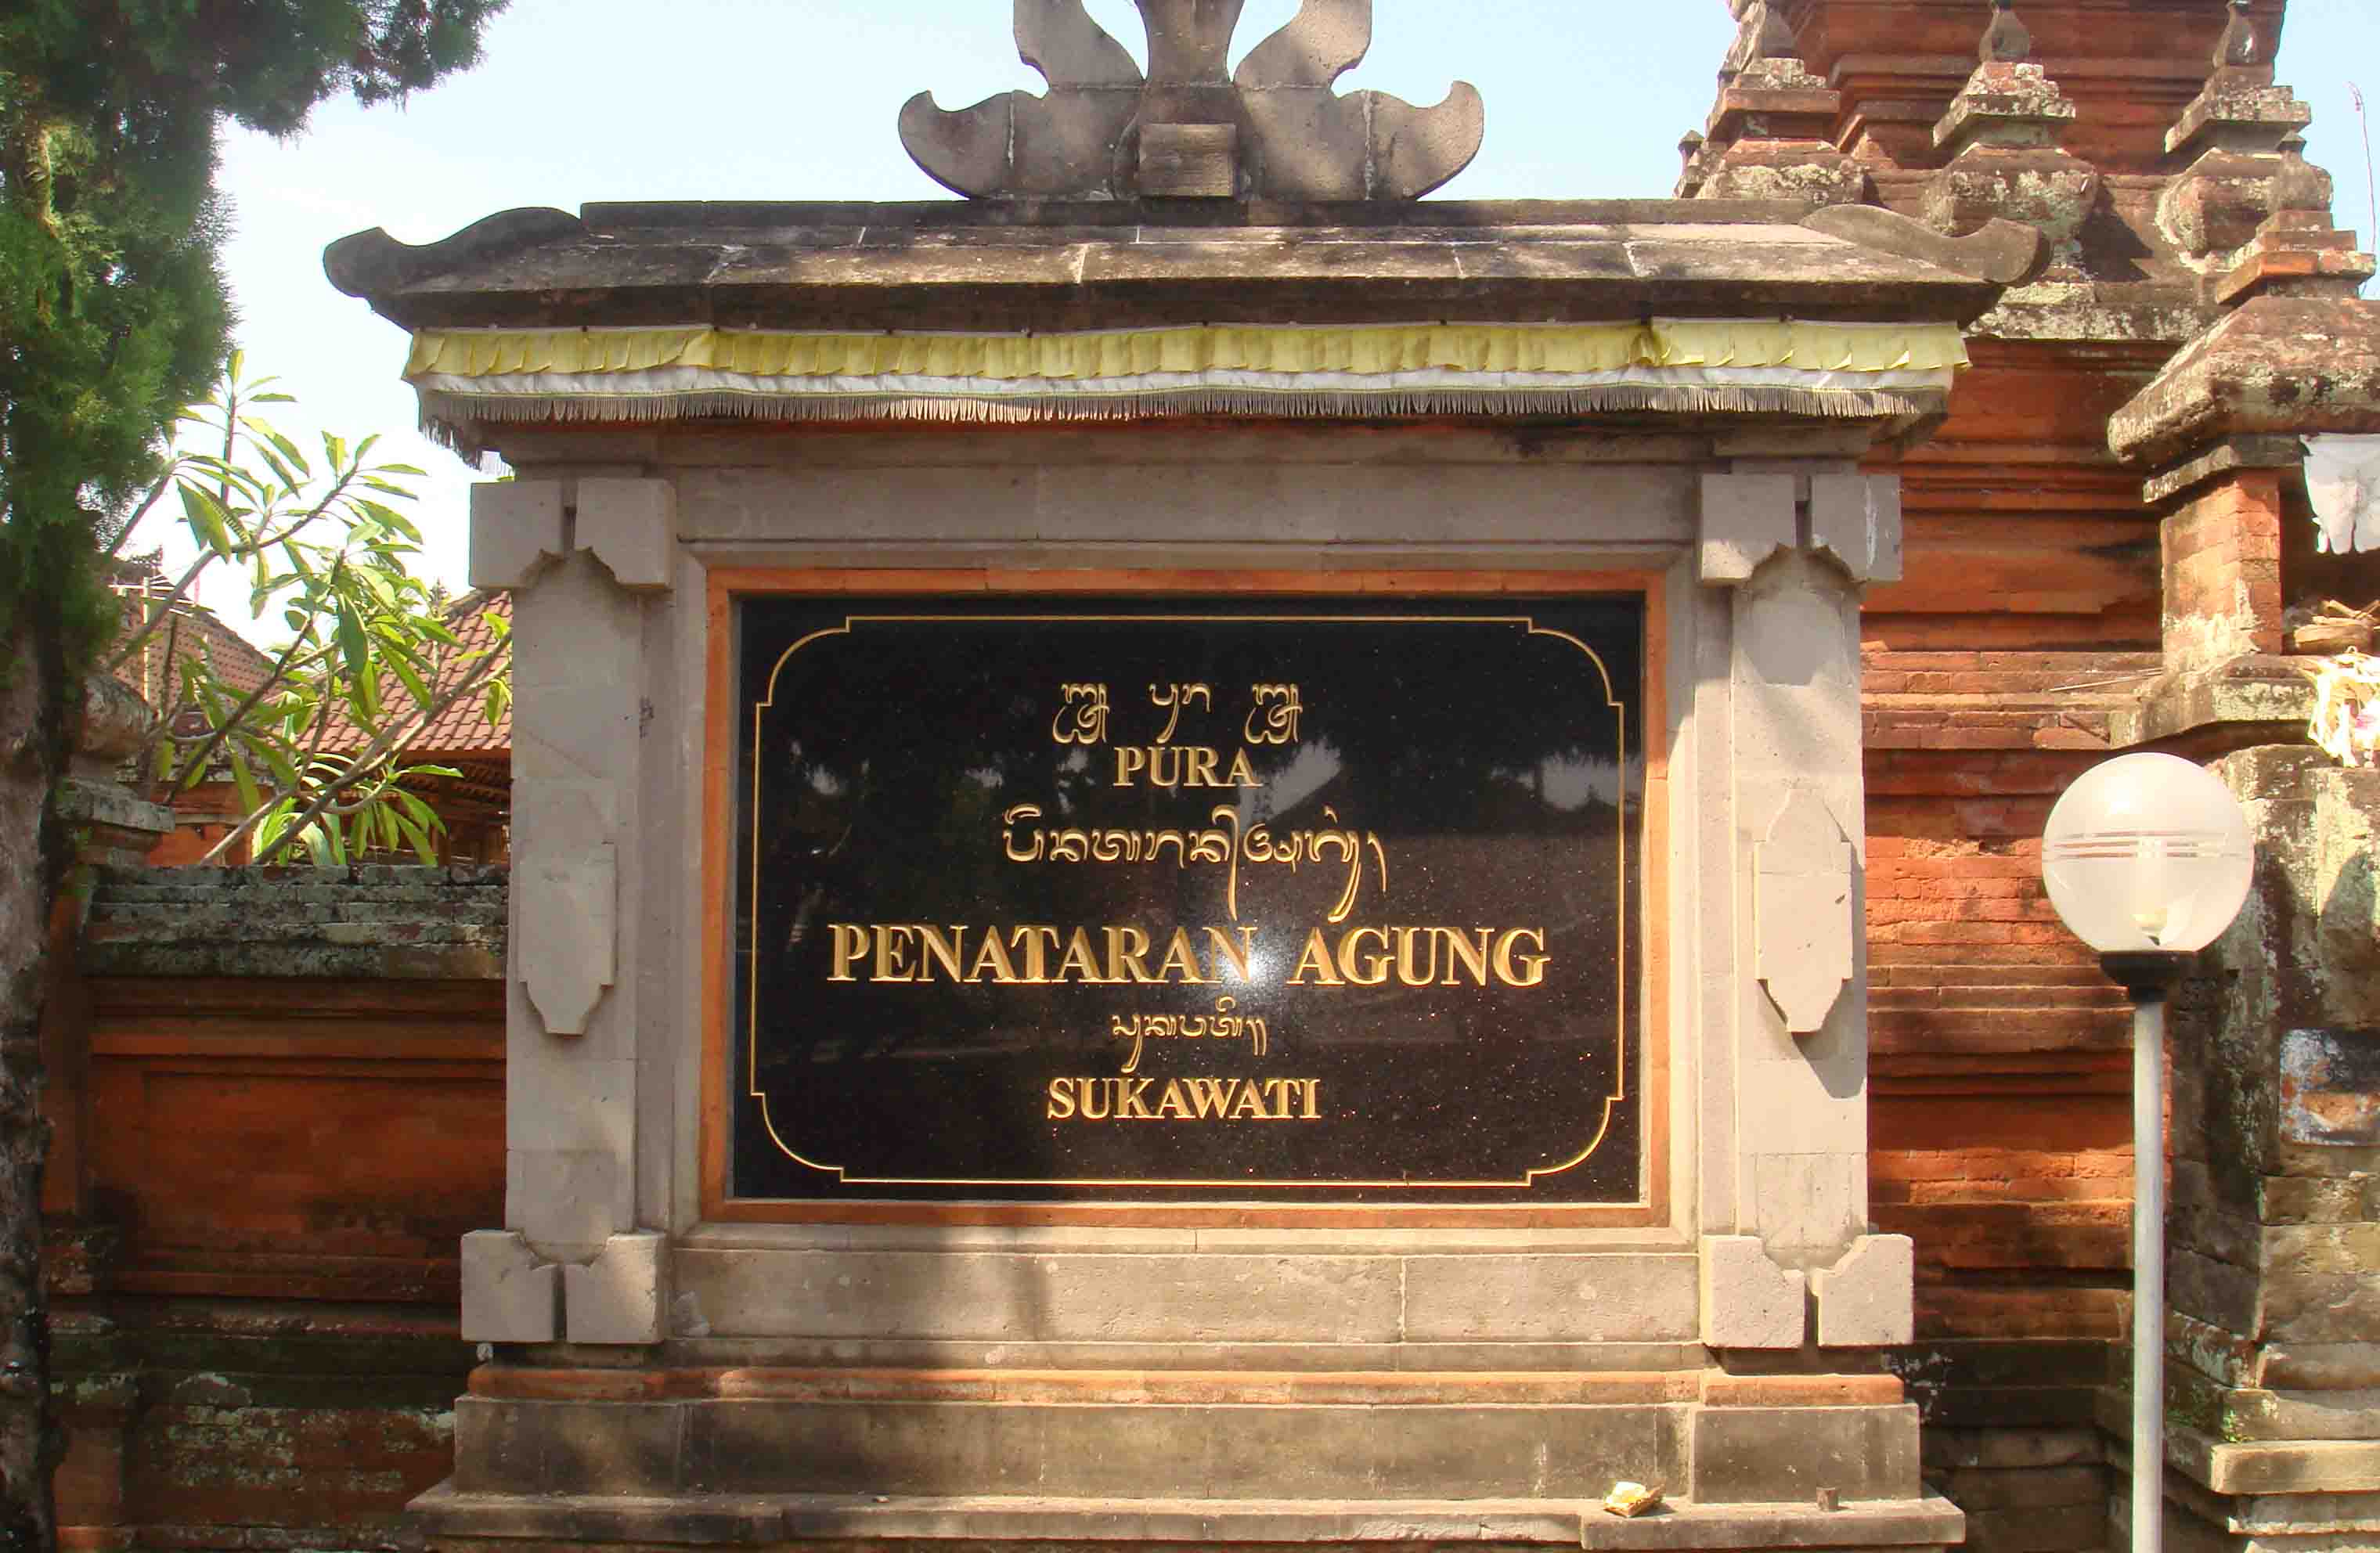 This central temple in Sukawati is a pilgrimage
site for all members of the royal houses of the surr